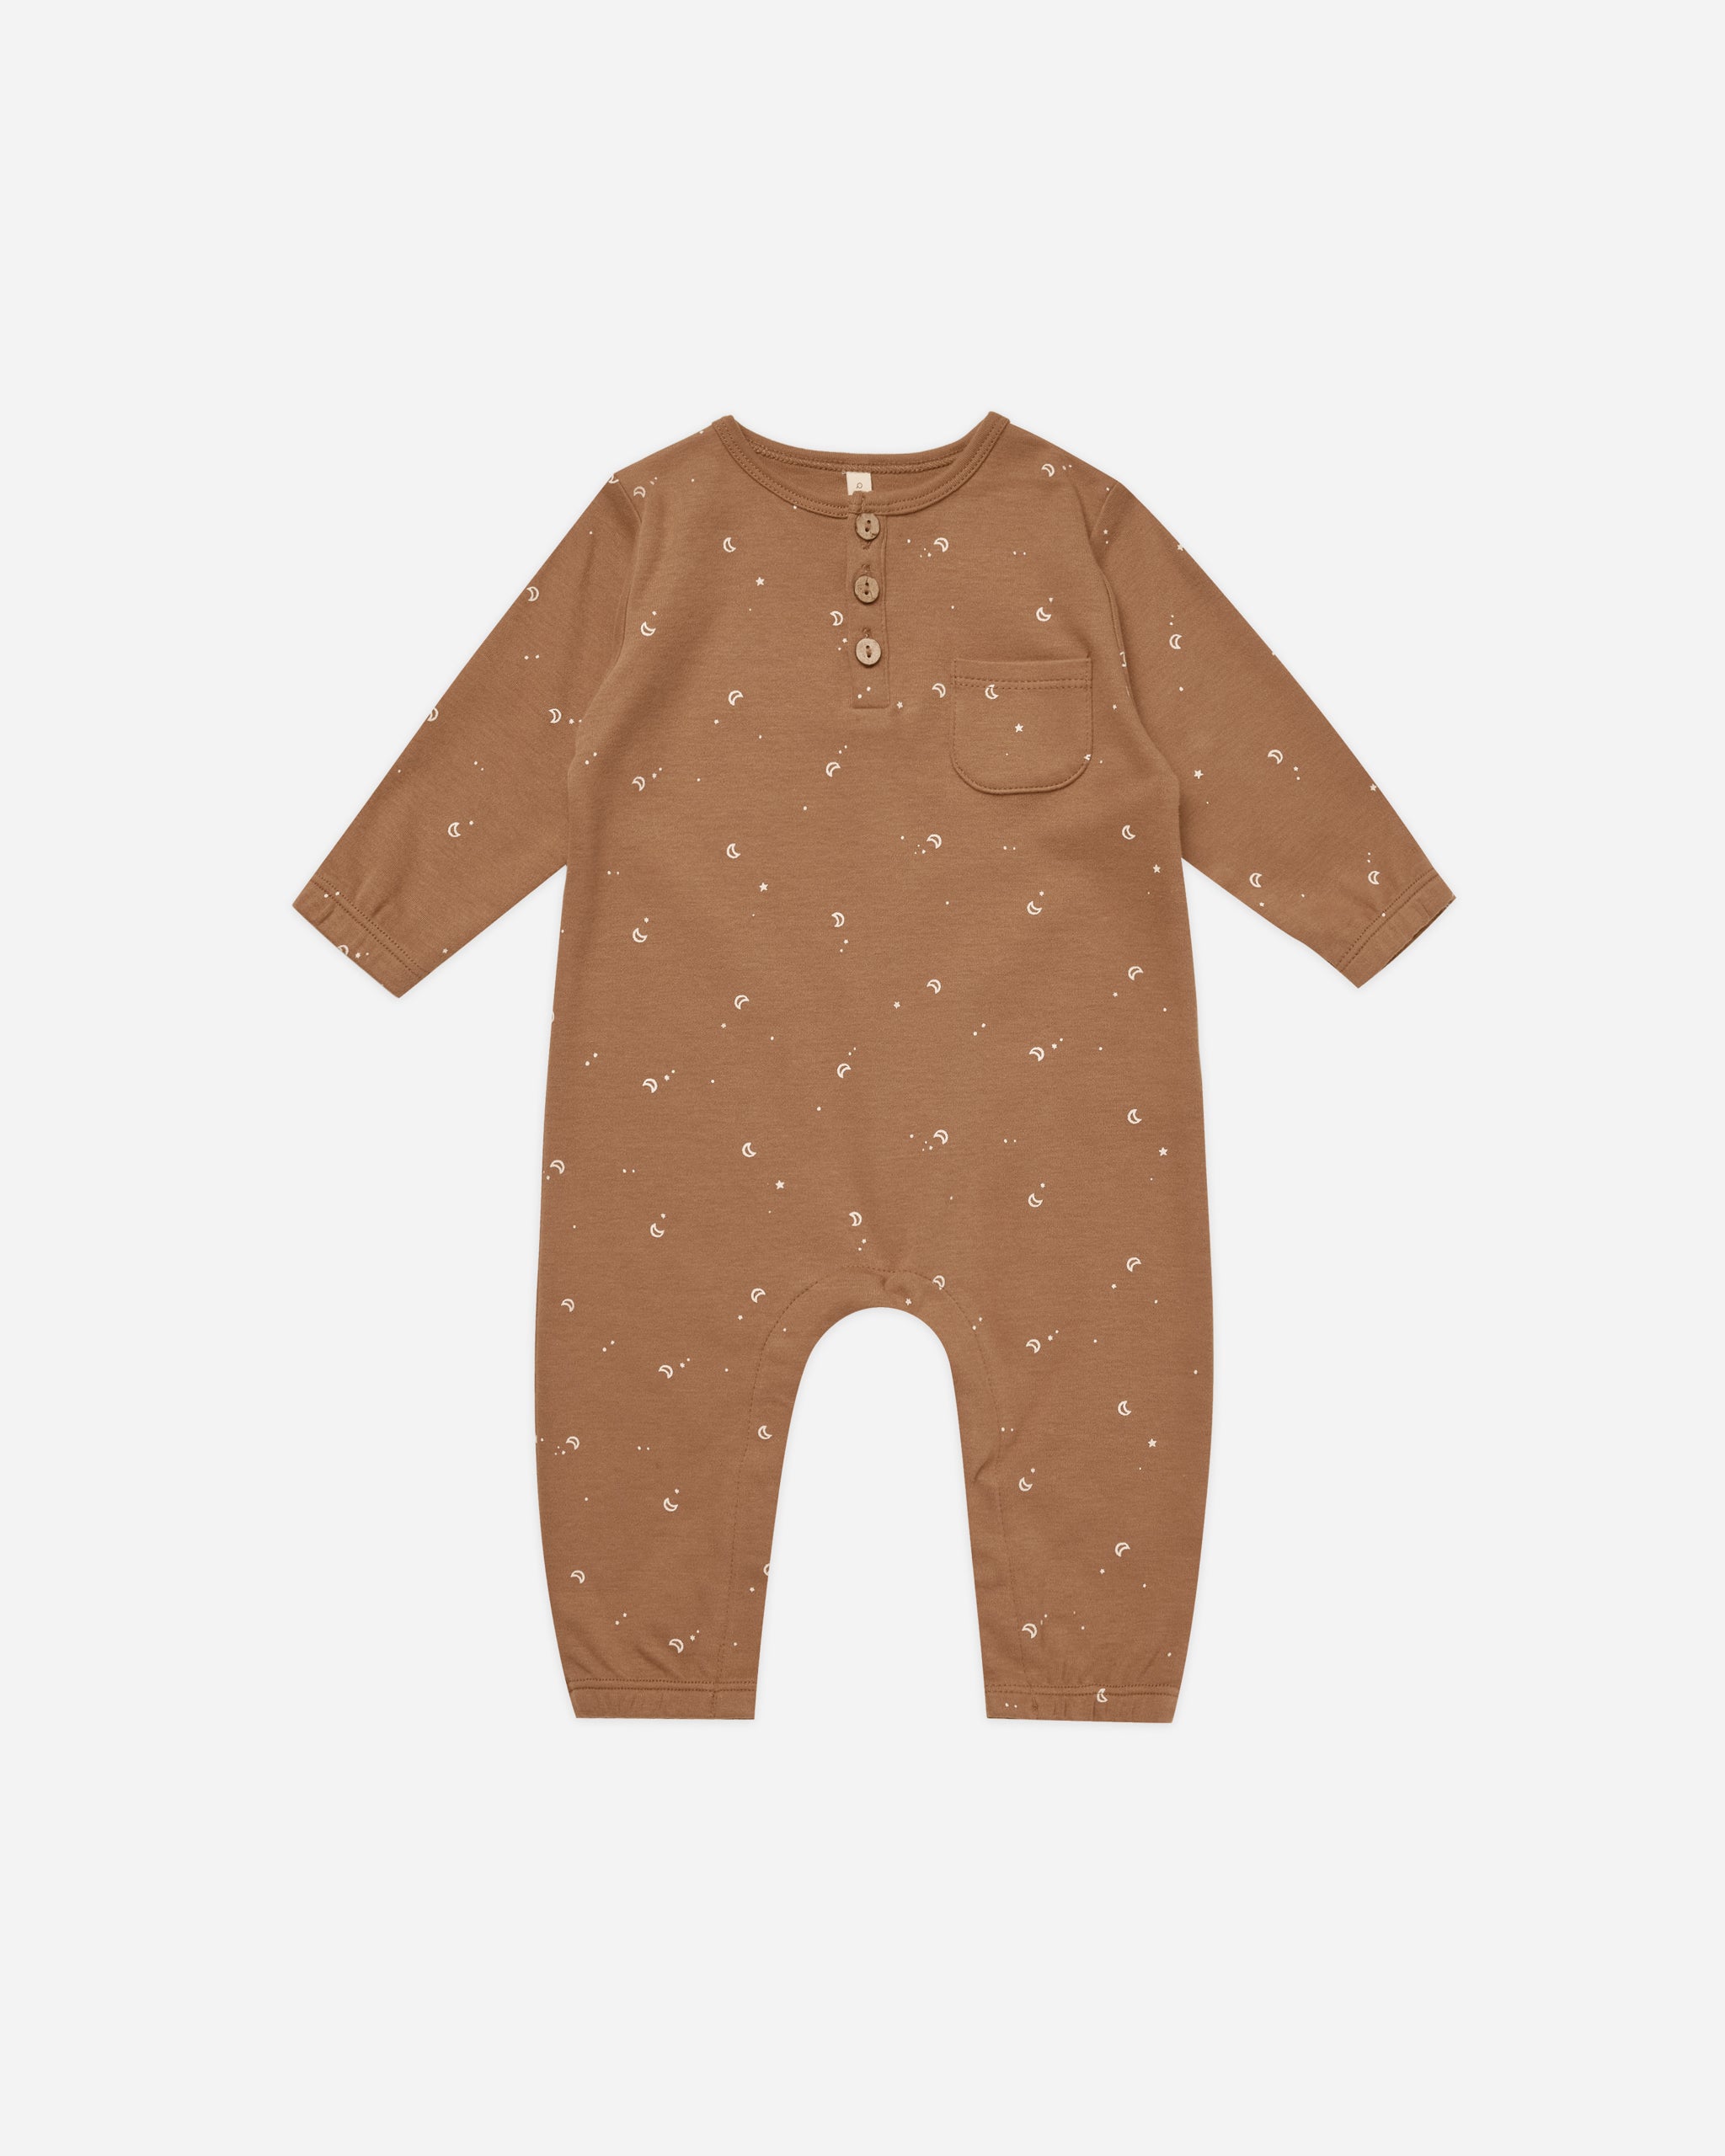 Long Sleeve Jumpsuit || Moons - Rylee + Cru | Kids Clothes | Trendy Baby Clothes | Modern Infant Outfits |